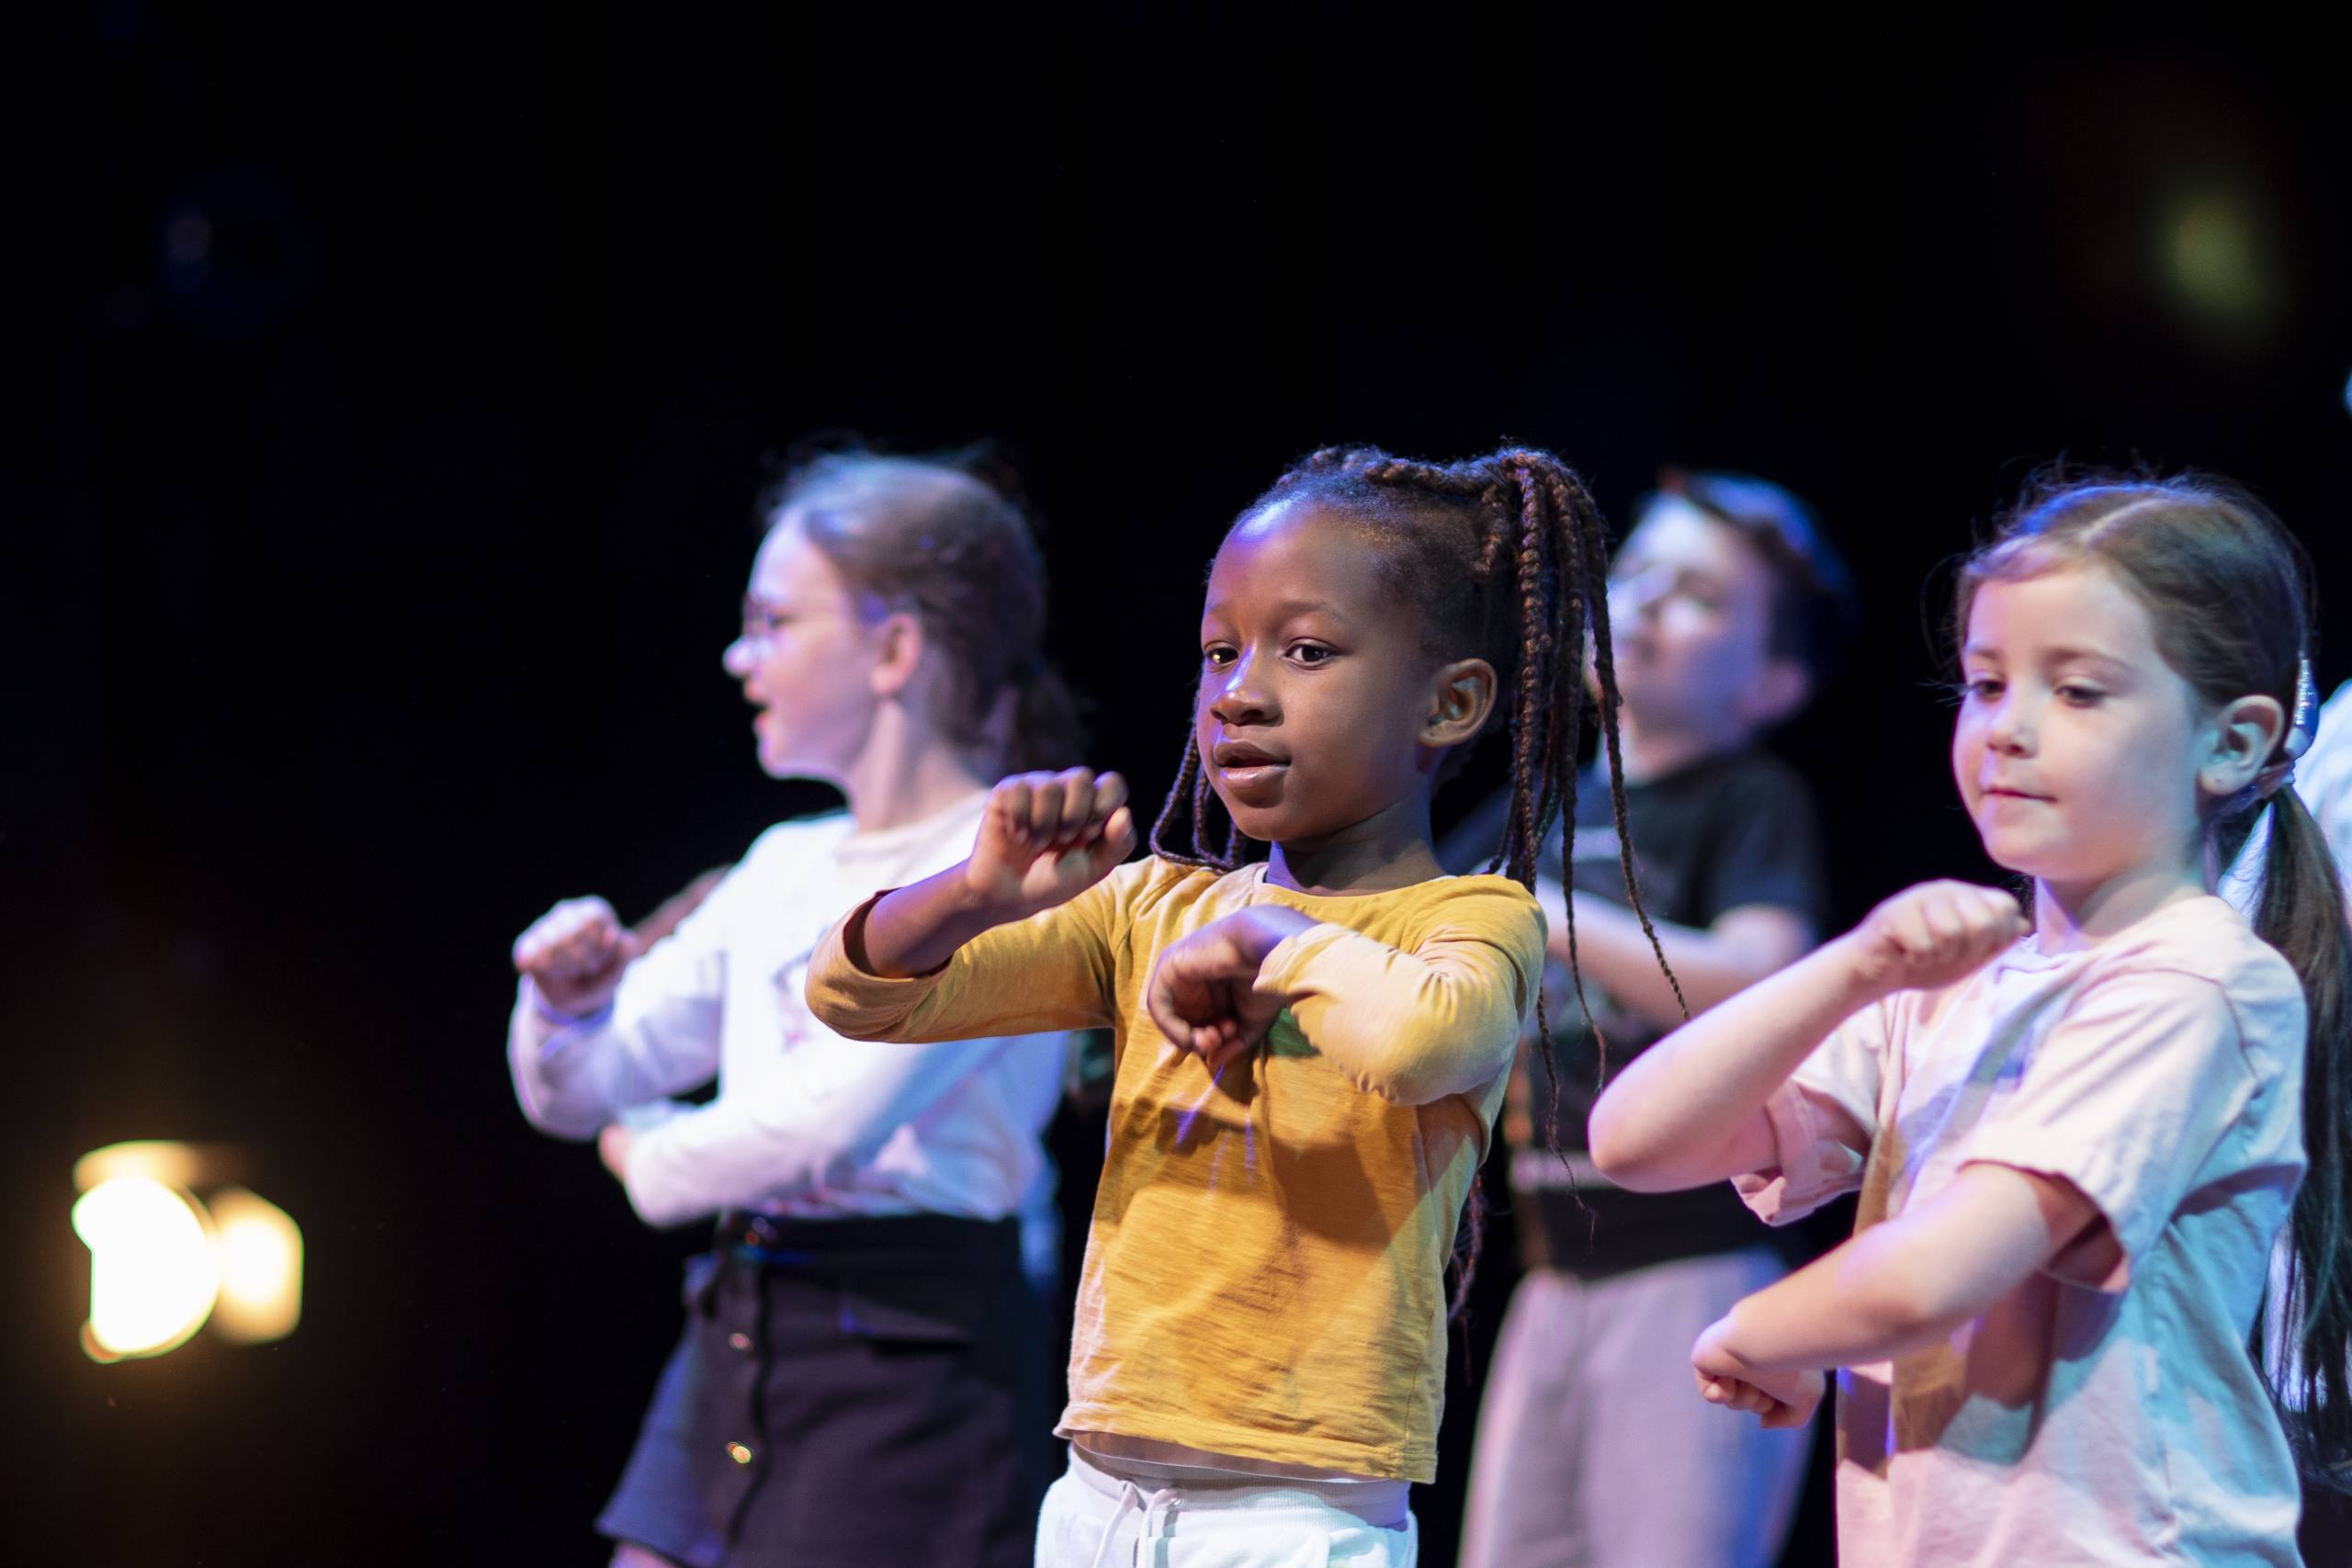 A group of four children dance to music at a workshop held in a theatre studio space